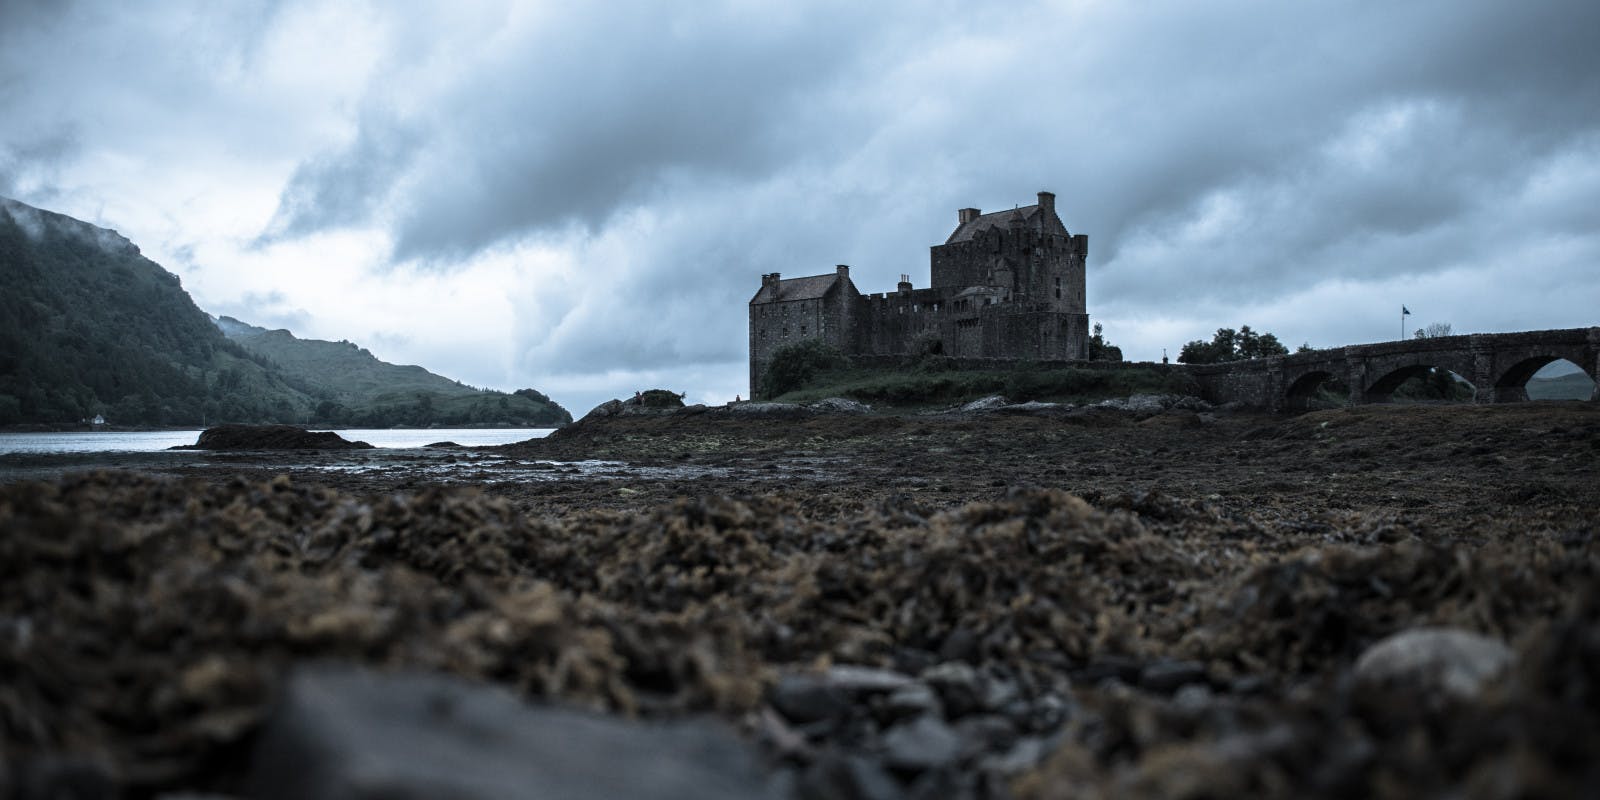 This castle was used in James Bond, located in Scotland